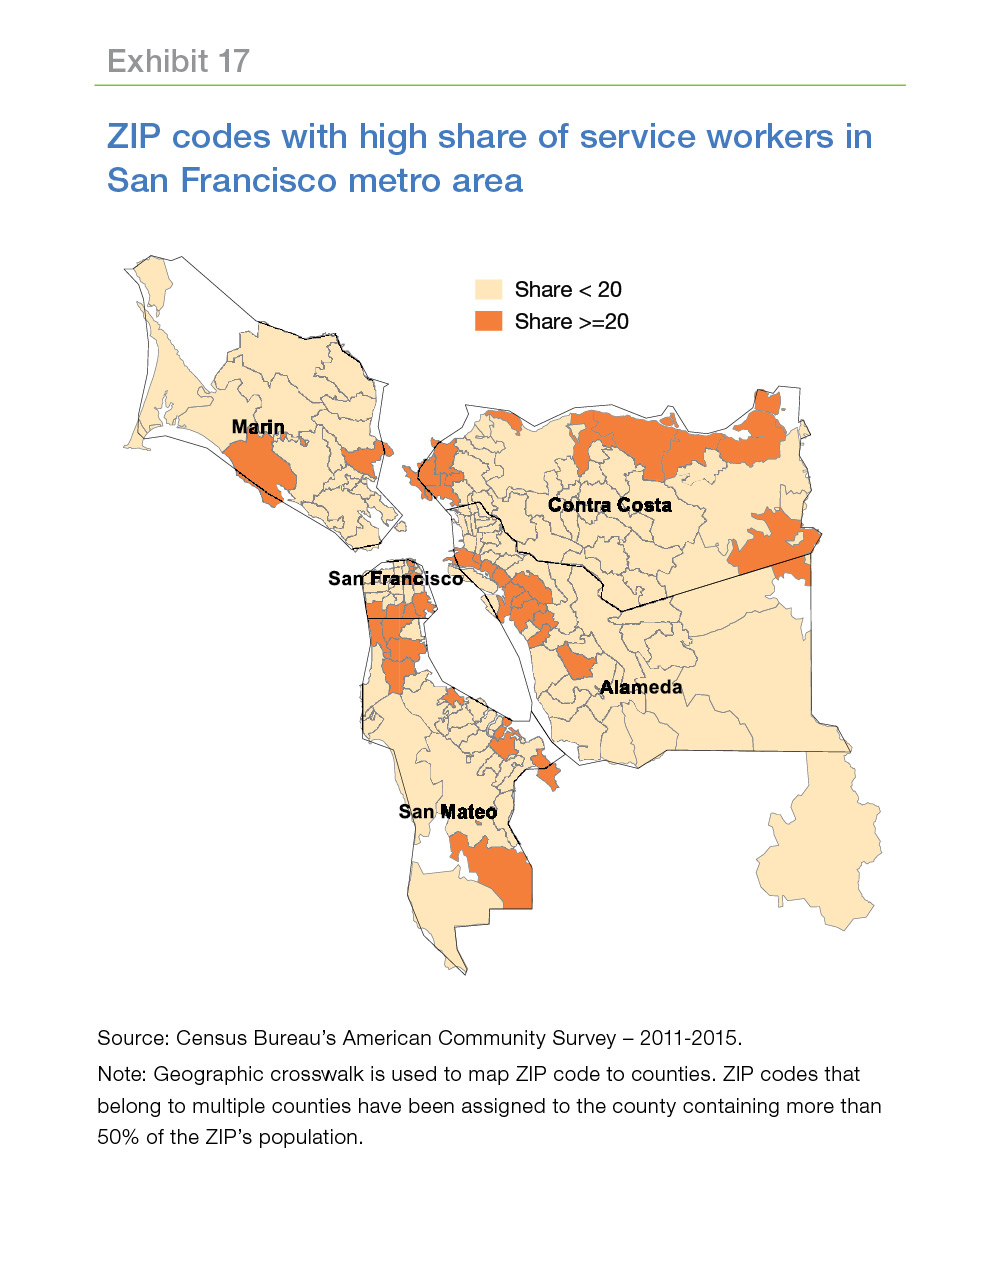 Maps showing s ZIP codes with a high share of service workers in San Francisco metro area